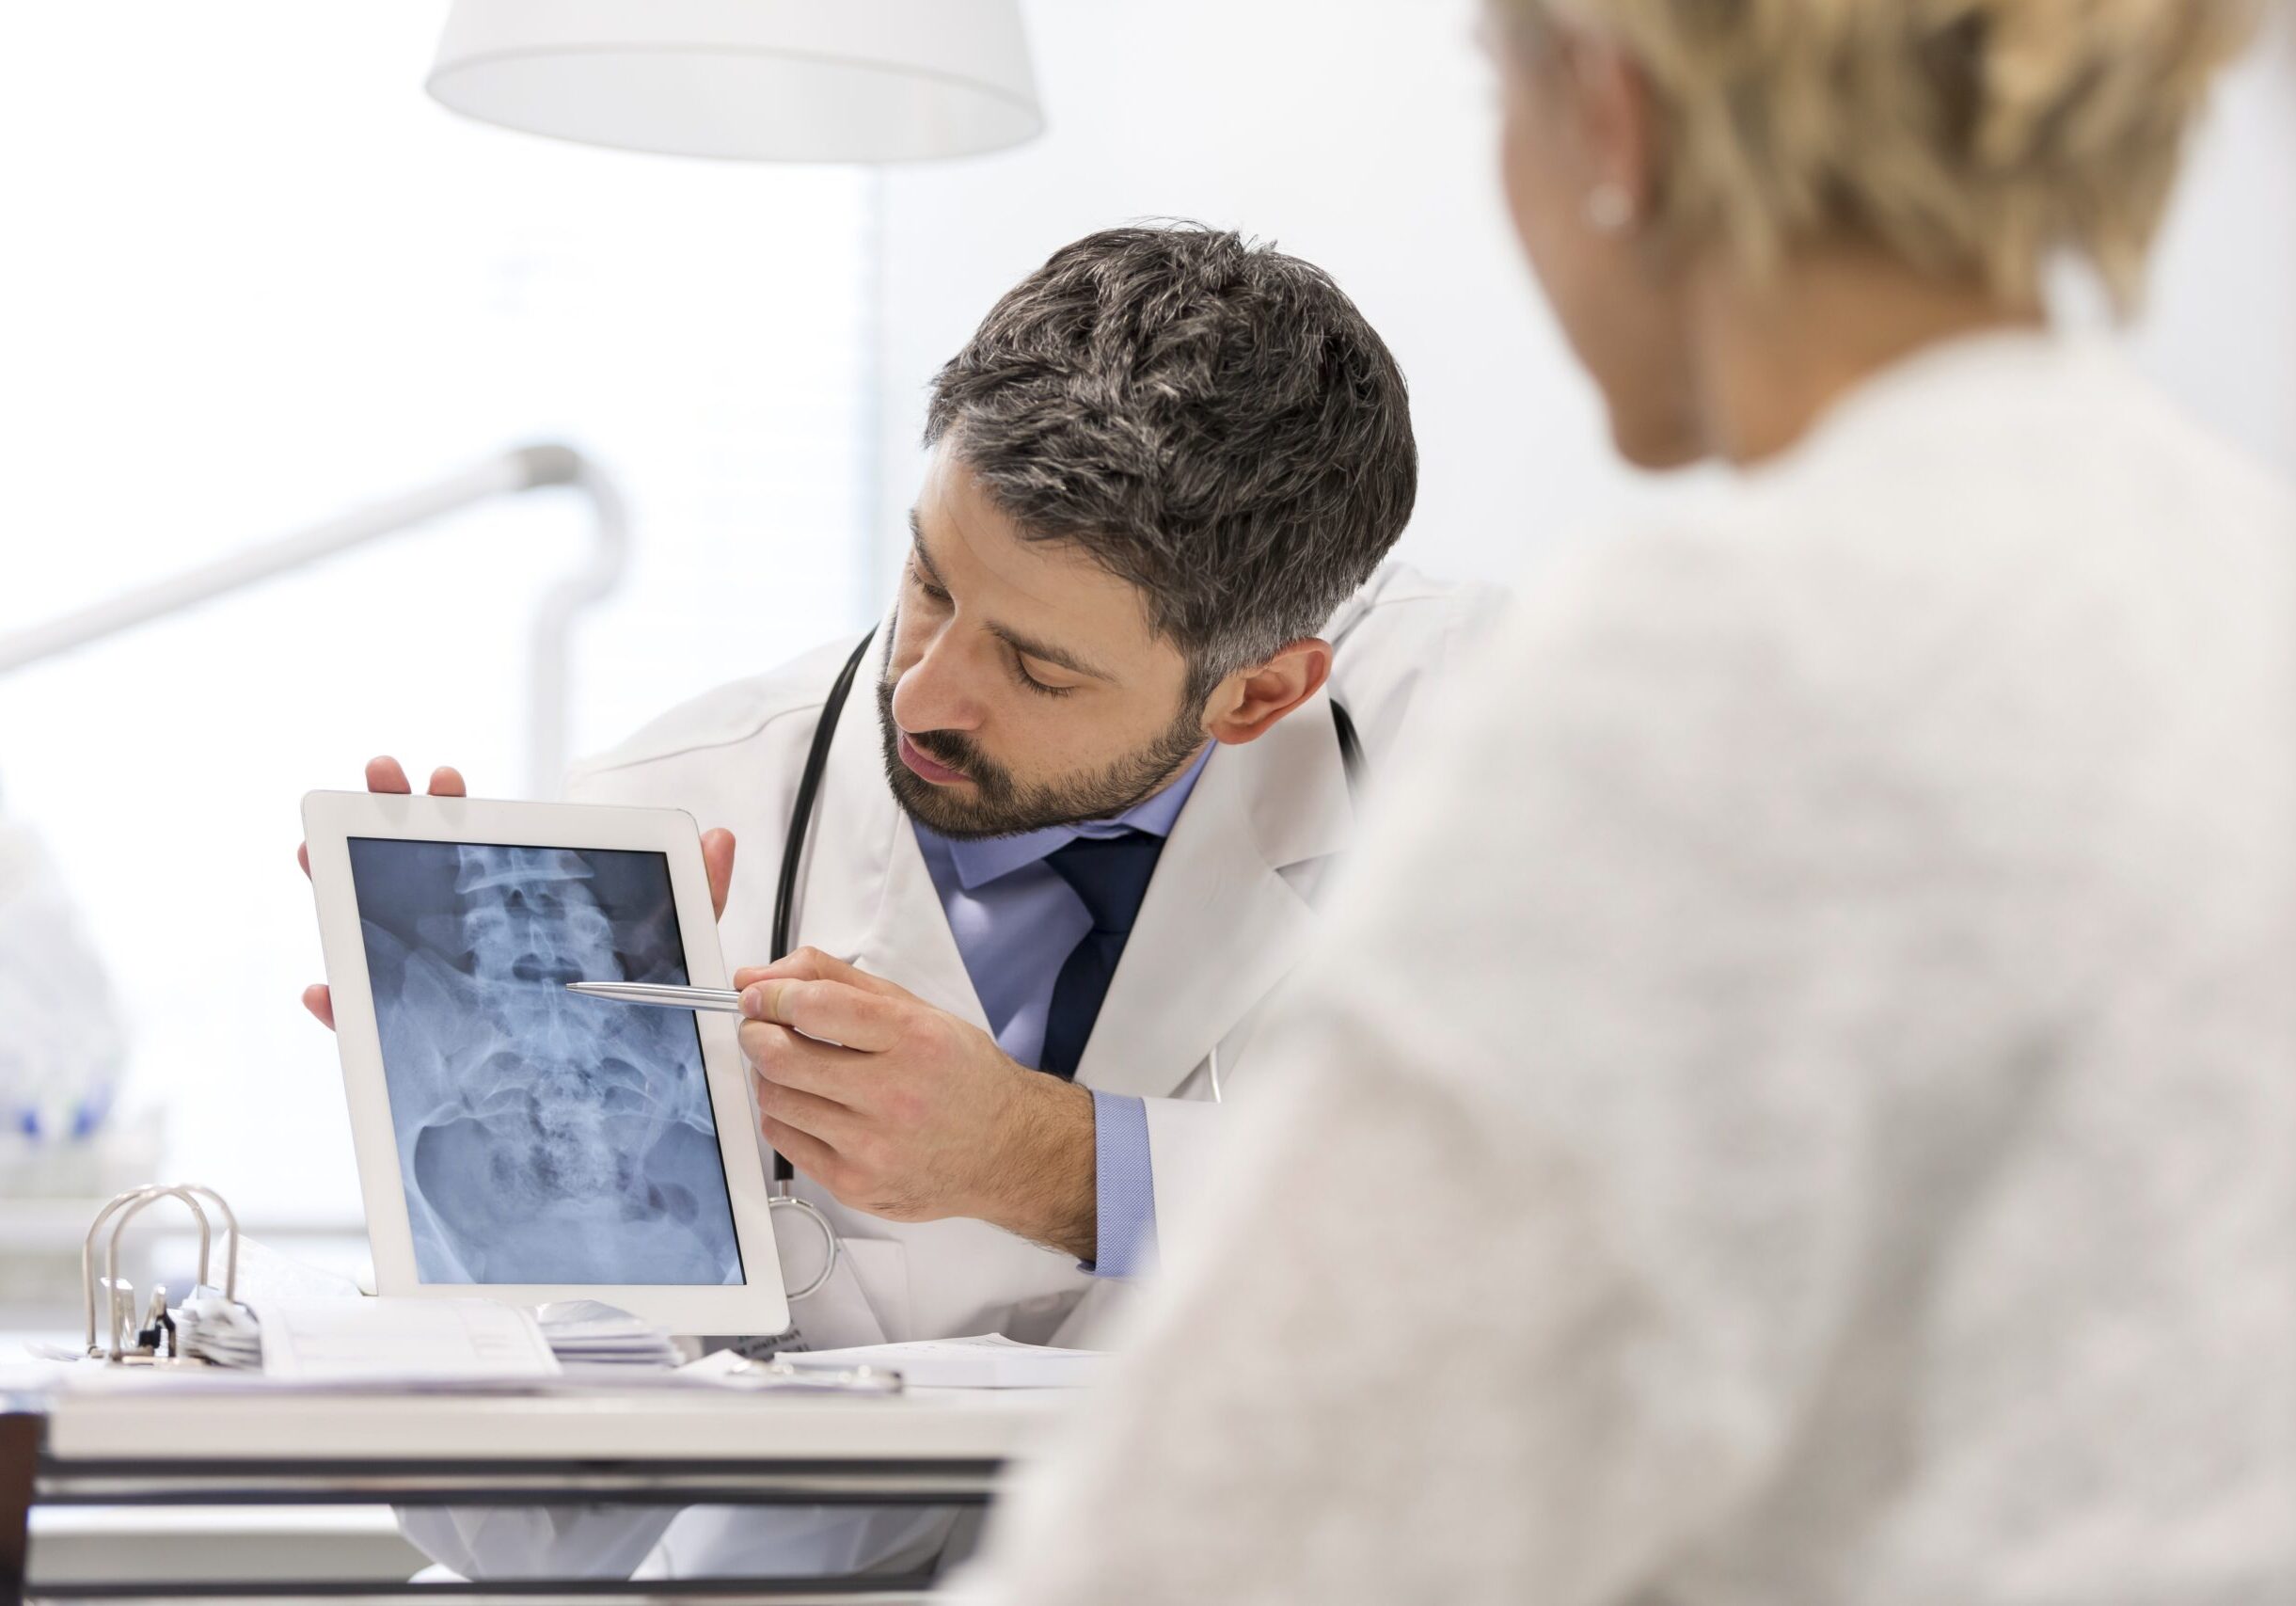 Doctor explaining x-ray on digital tablet to patient at desk in hospital